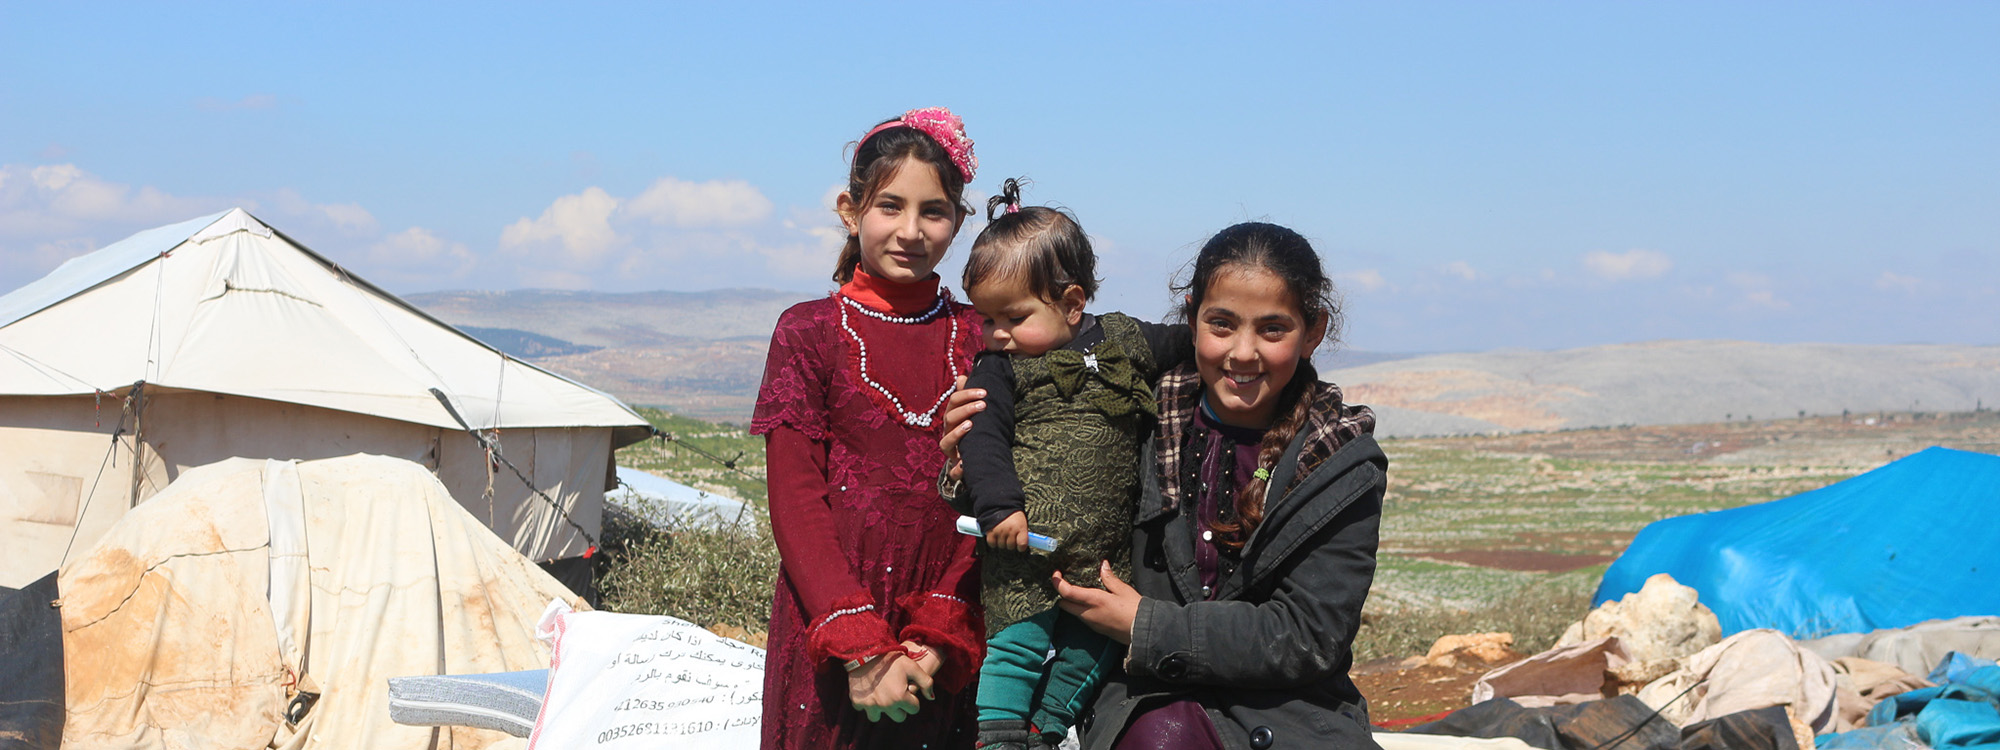 Three children in winter clothing standing outside a tent against the landscape in Syria